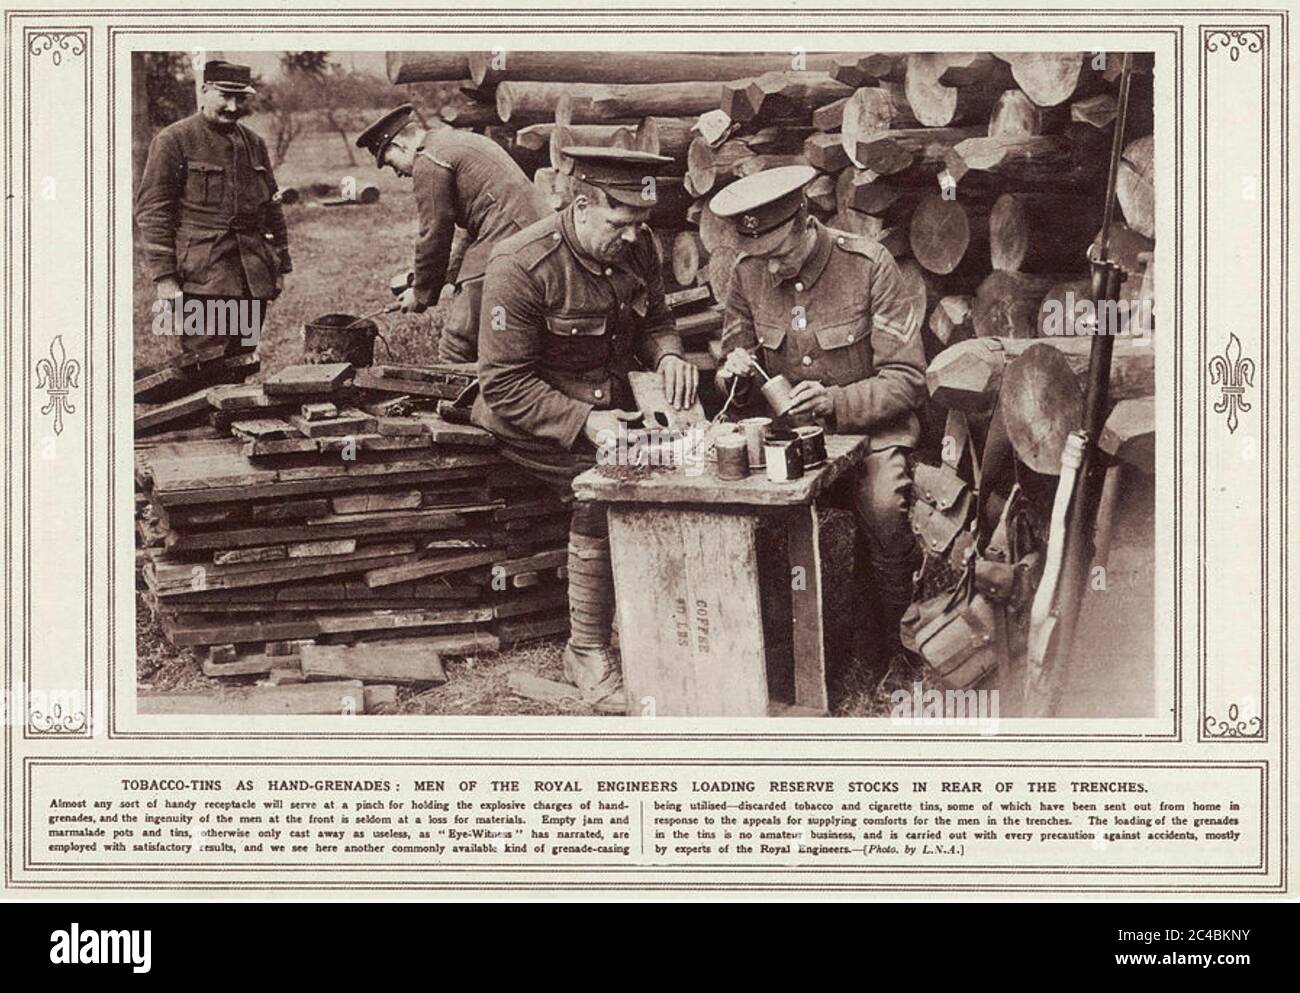 ROYAL ENGINEERS making improvised grenades using old tobacco tins during WW1 Stock Photo